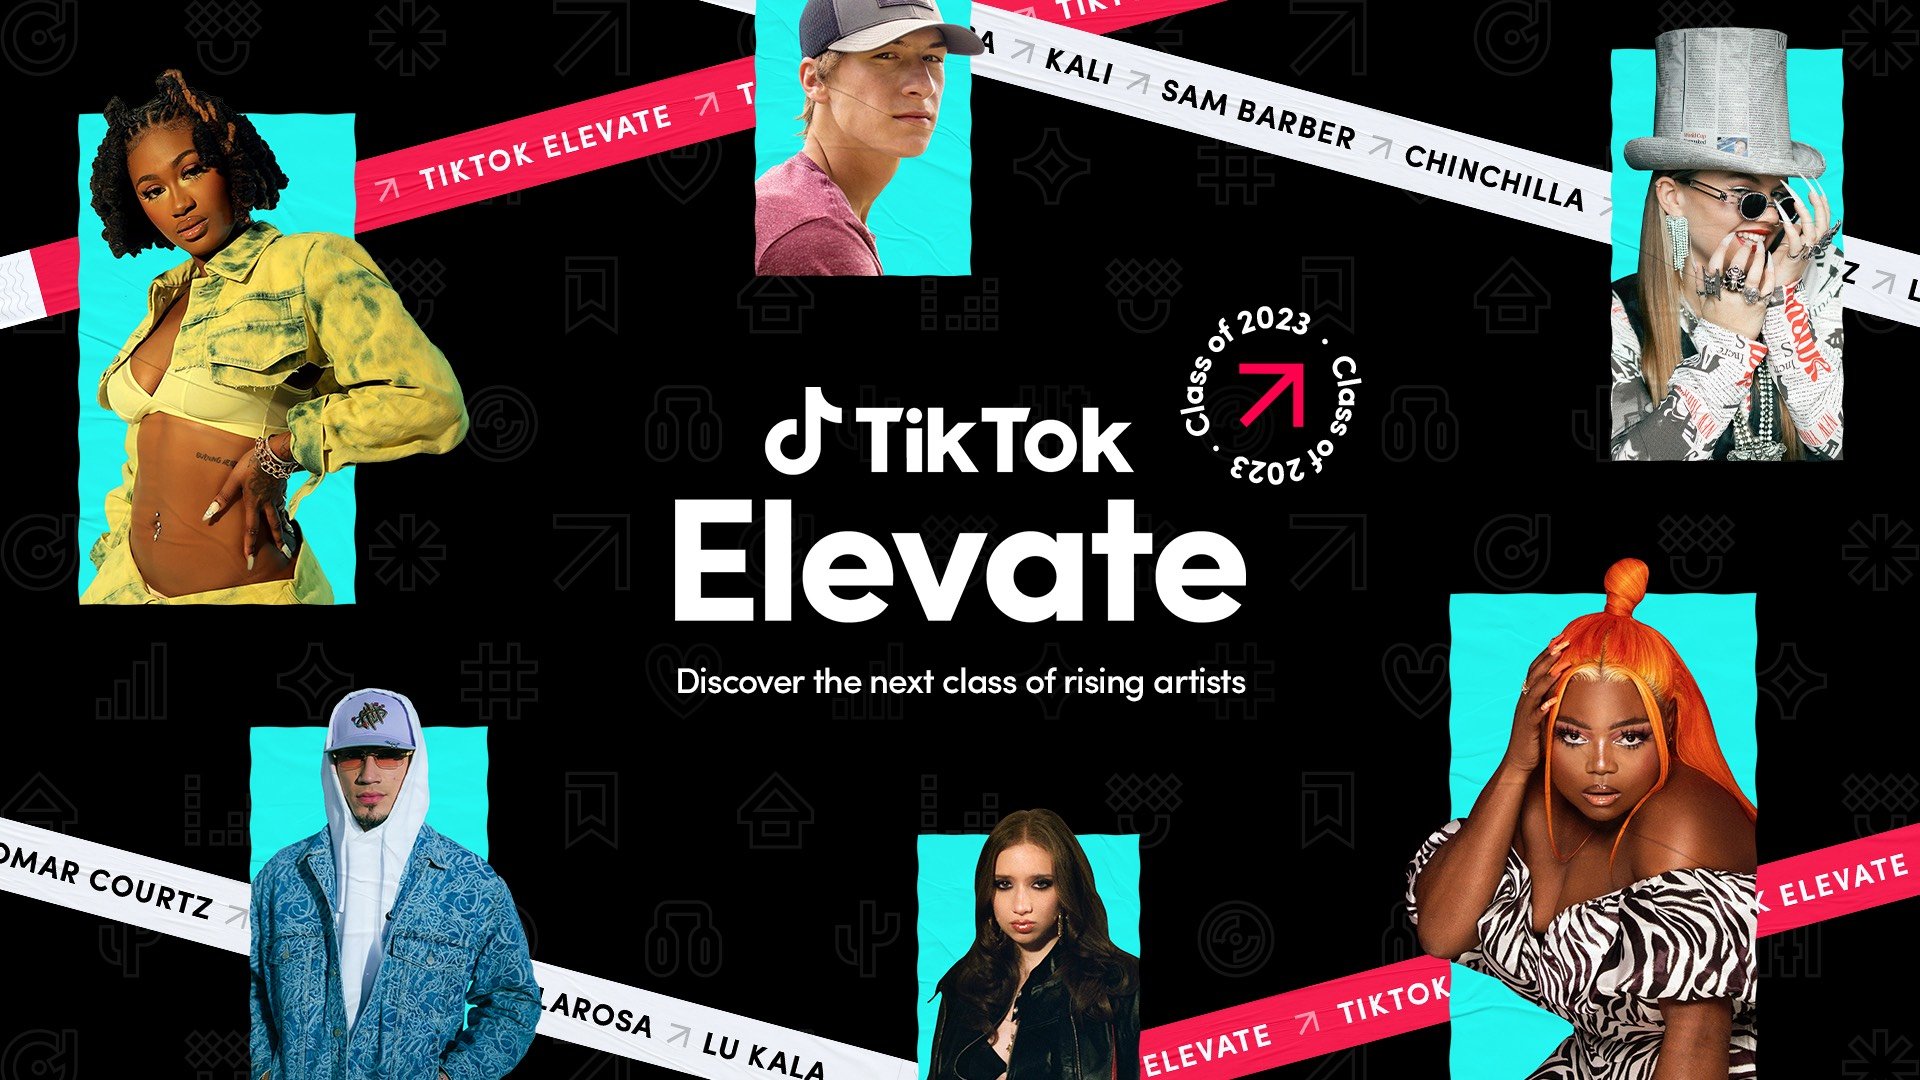 TikTok launches global ‘Elevate’ rising artists program to ‘identify the next wave of emerging stars’ – Music Business Worldwide